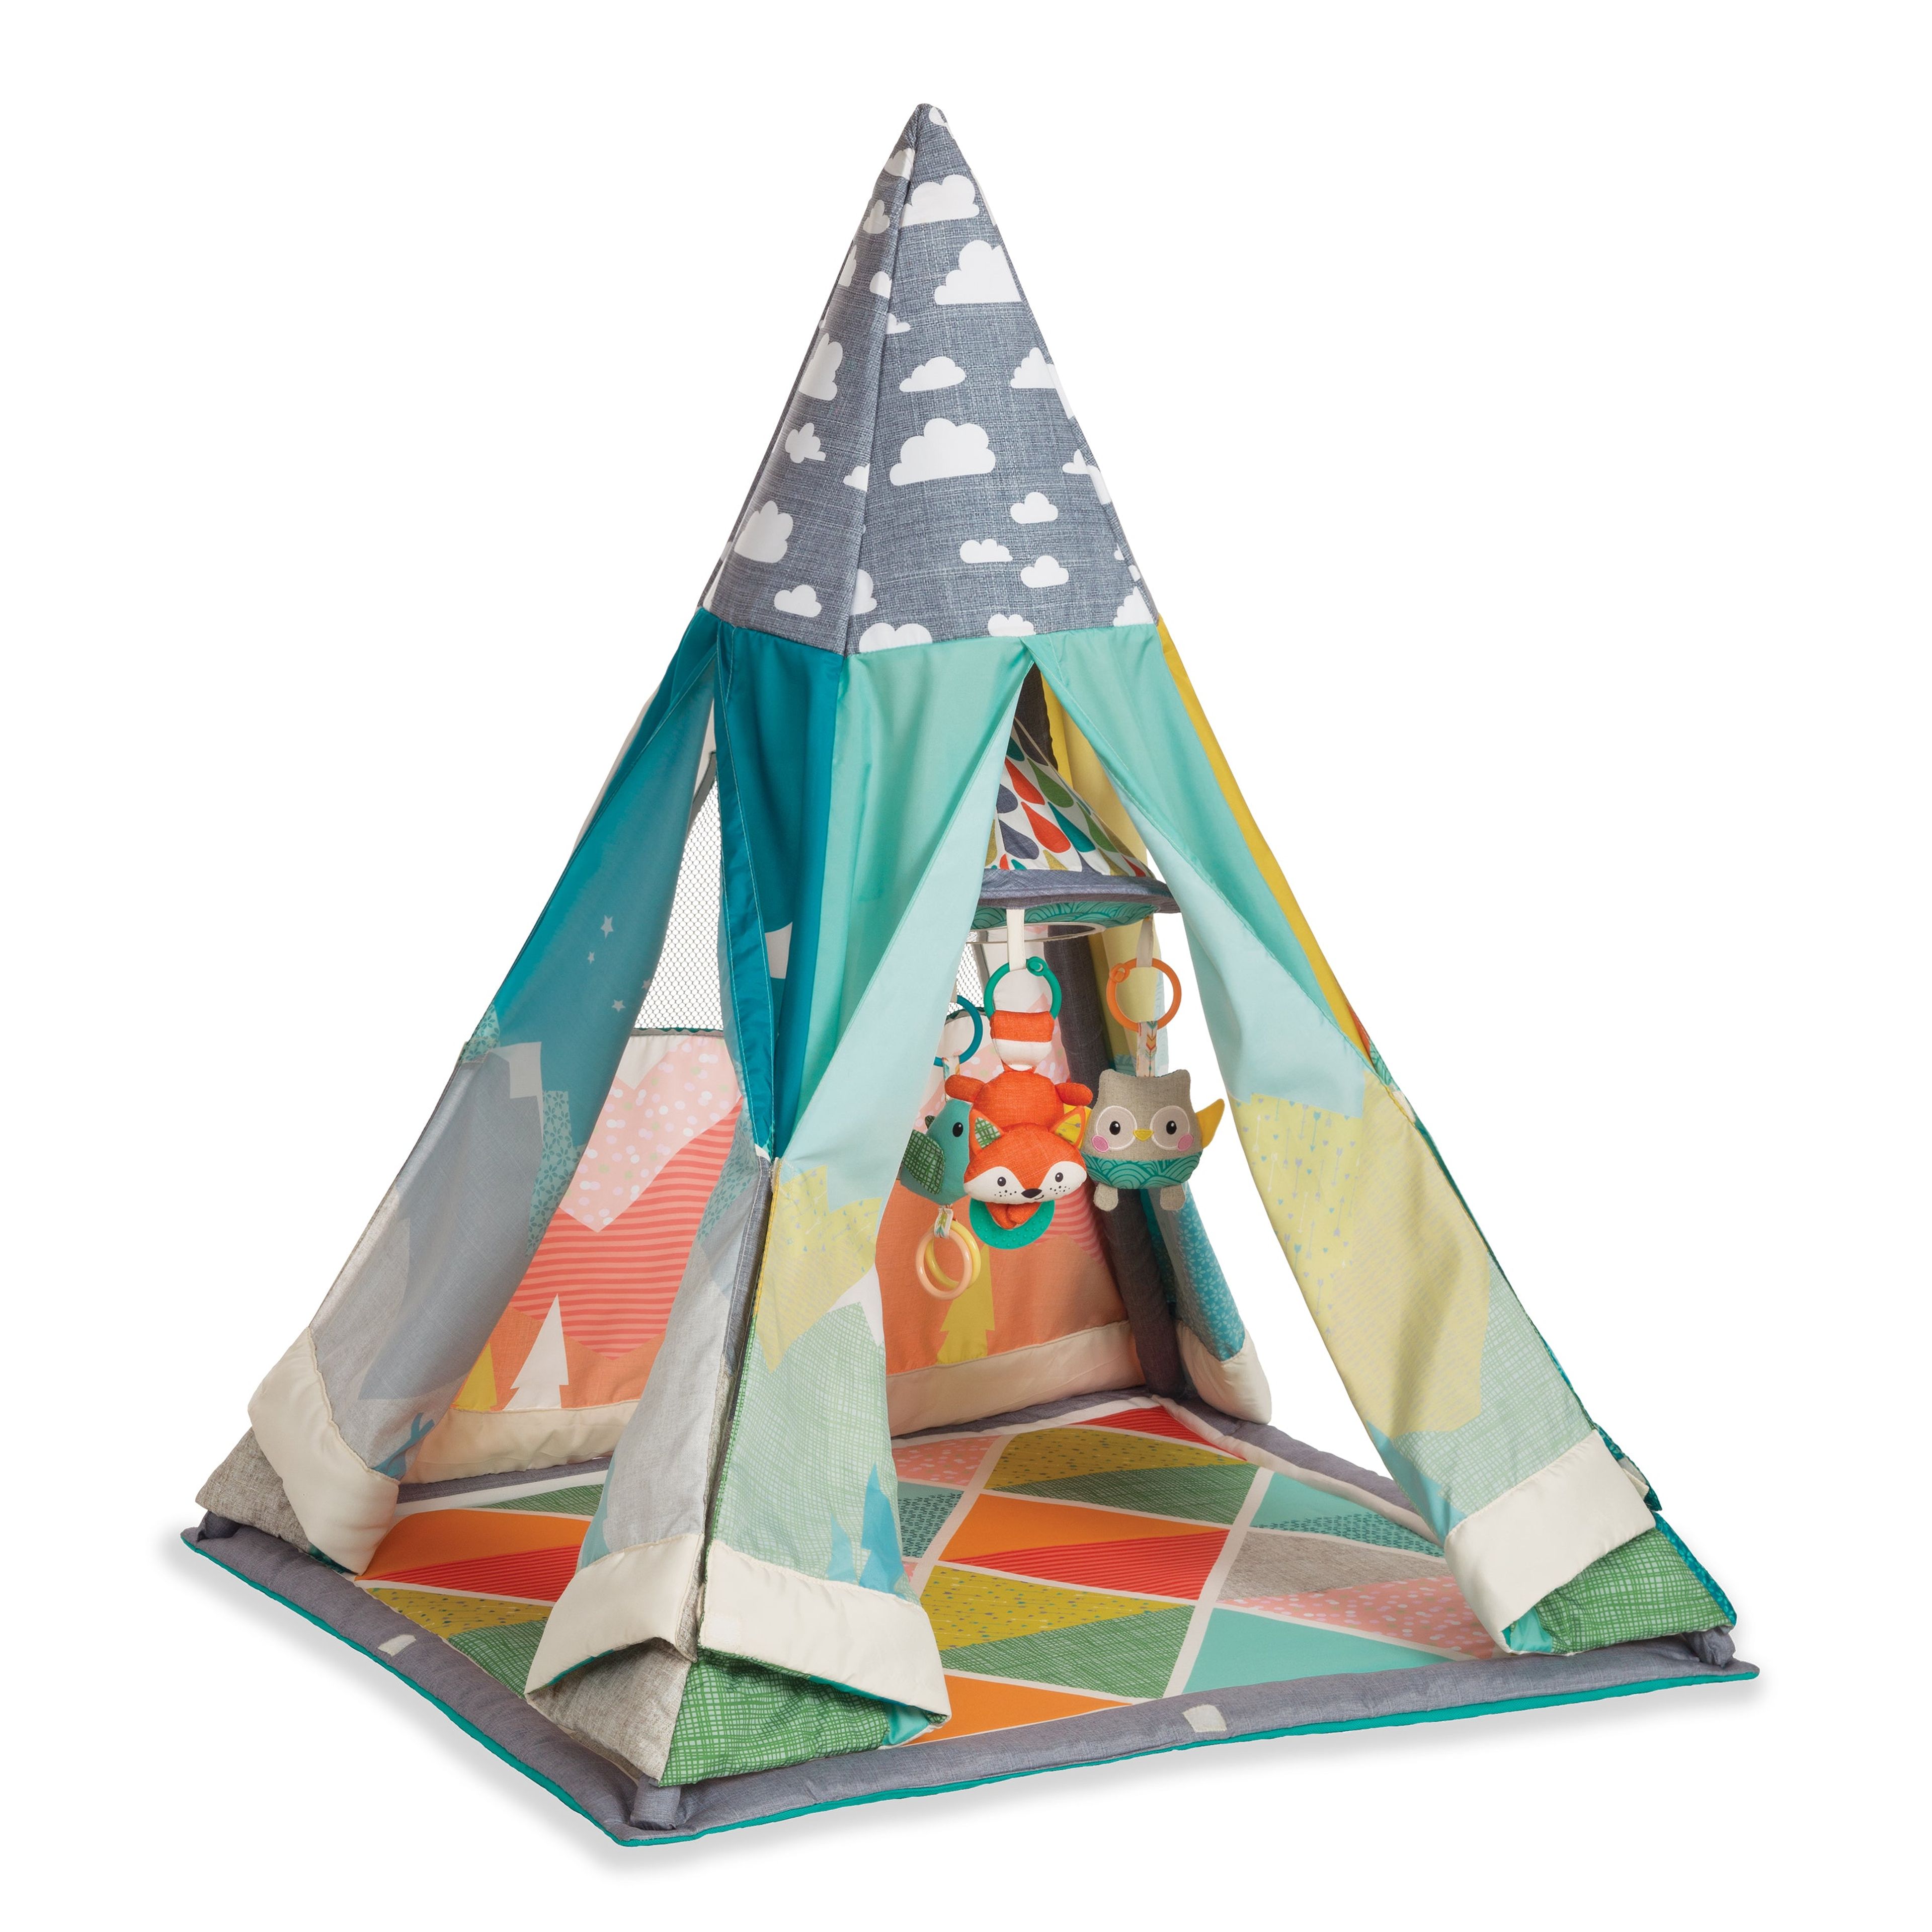 Infant to Toddler Play Gym & Fun Teepee